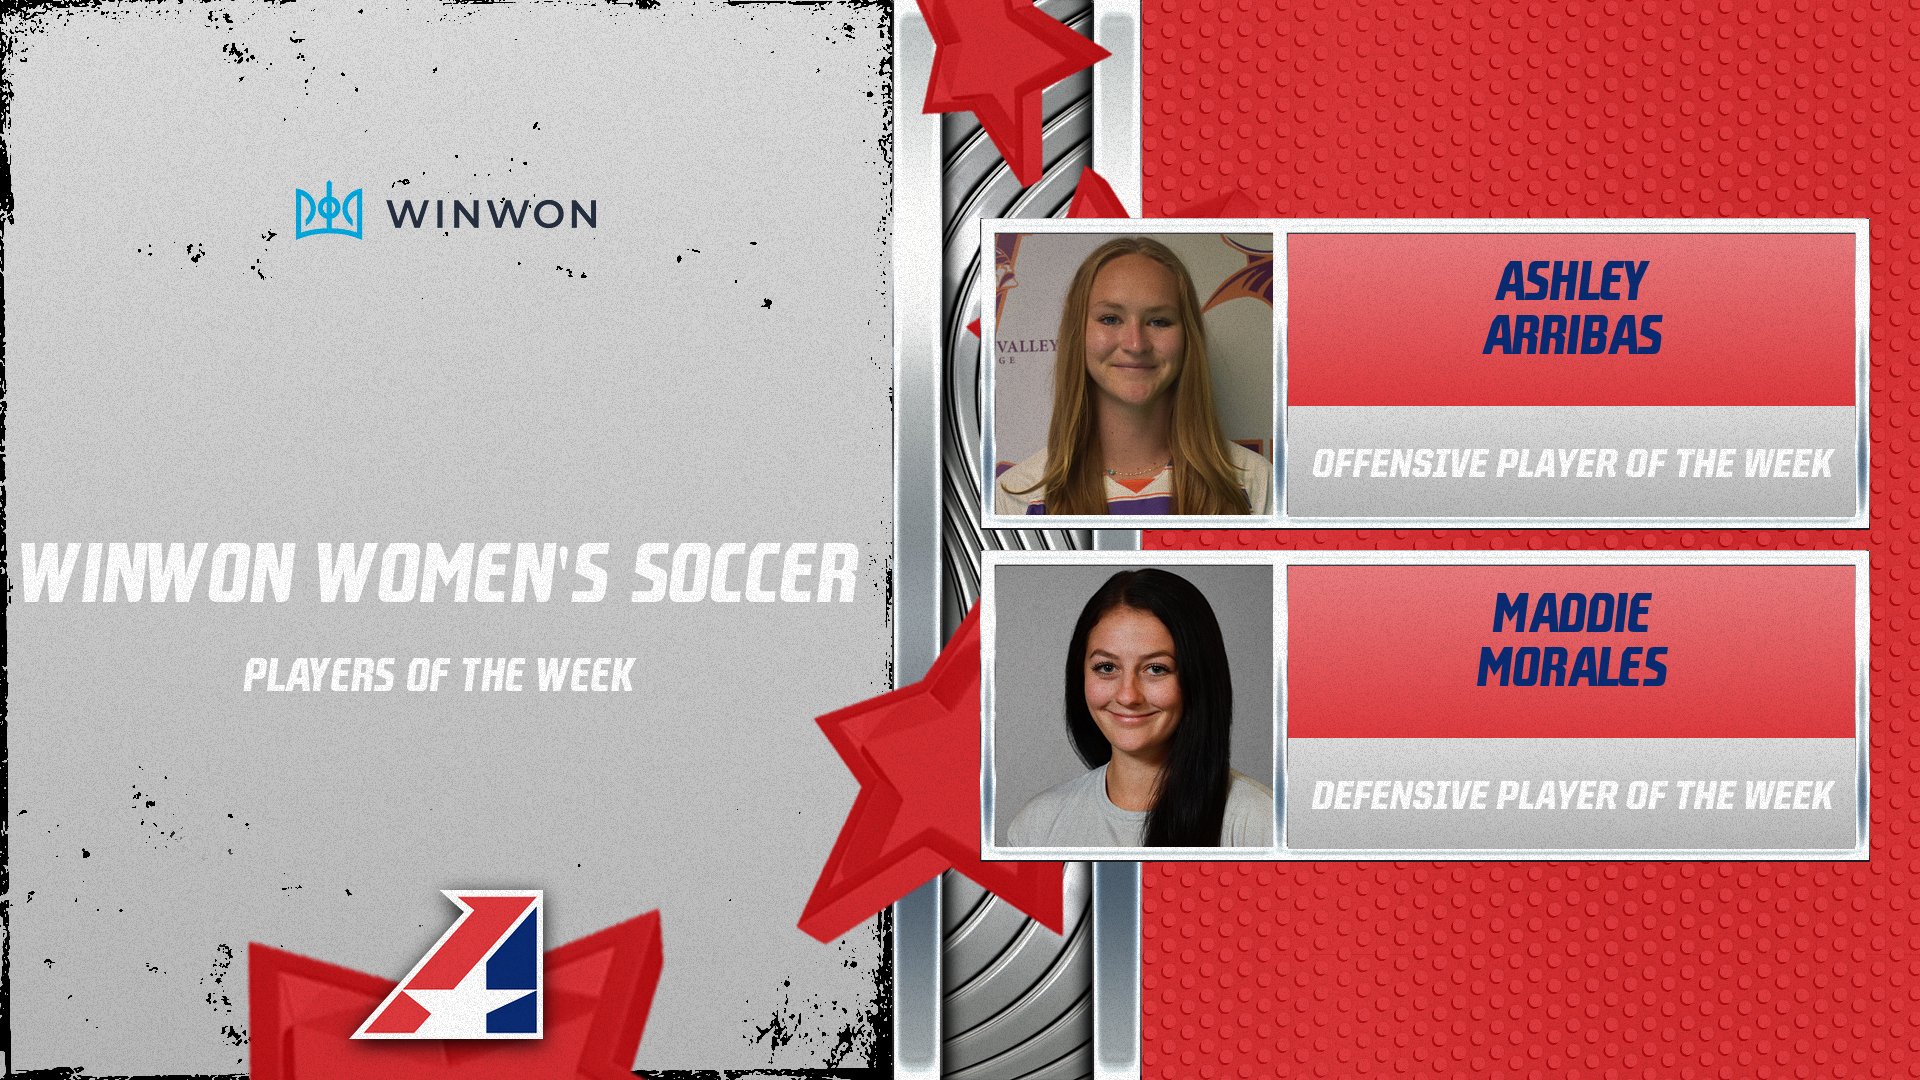 Two First Time Winners This Season Highlight WinWon Women’s Soccer Players of the Week